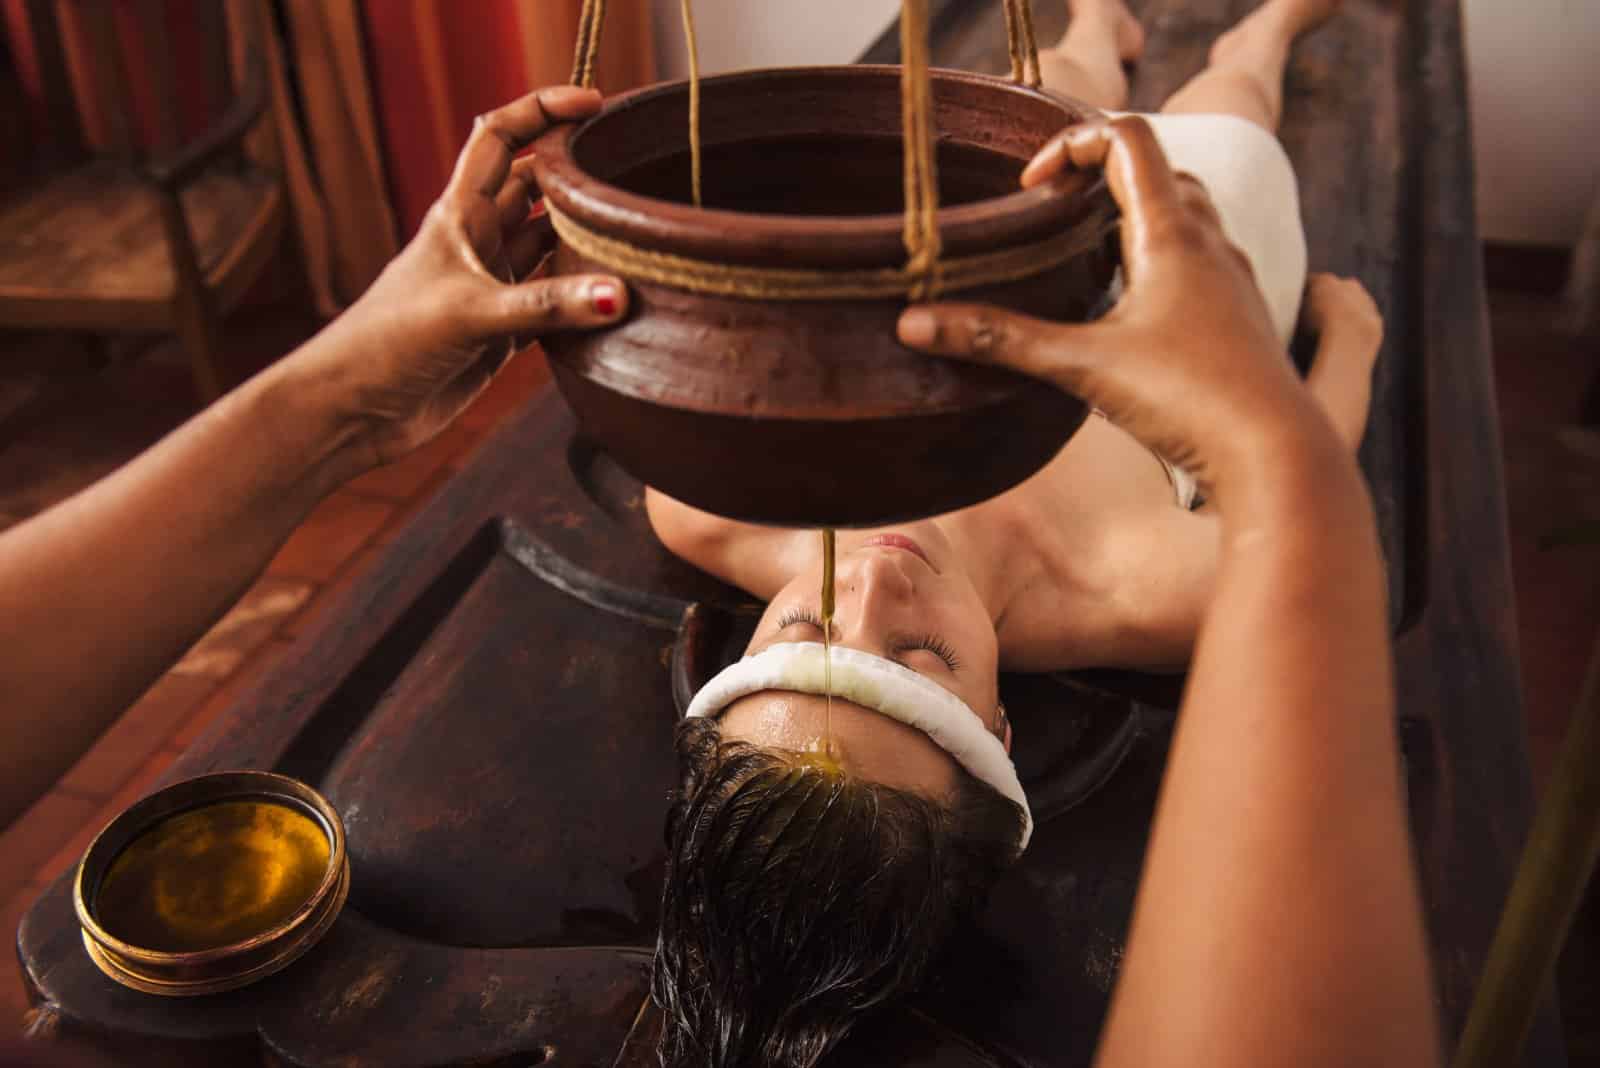 <p class="wp-caption-text">Image Credit: Shutterstock / Dmytro Gilitukha</p>  <p><span>The serene and natural settings of Ayurvedic retreats play a crucial role in the healing process. Immersing yourself in nature, whether through guided walks, gardening, or simply spending time in tranquil surroundings, enhances the therapeutic effects of your treatments. This connection to the natural world fosters a sense of peace and well-being, grounding you in the present moment and deepening your Ayurvedic healing journey.</span></p>